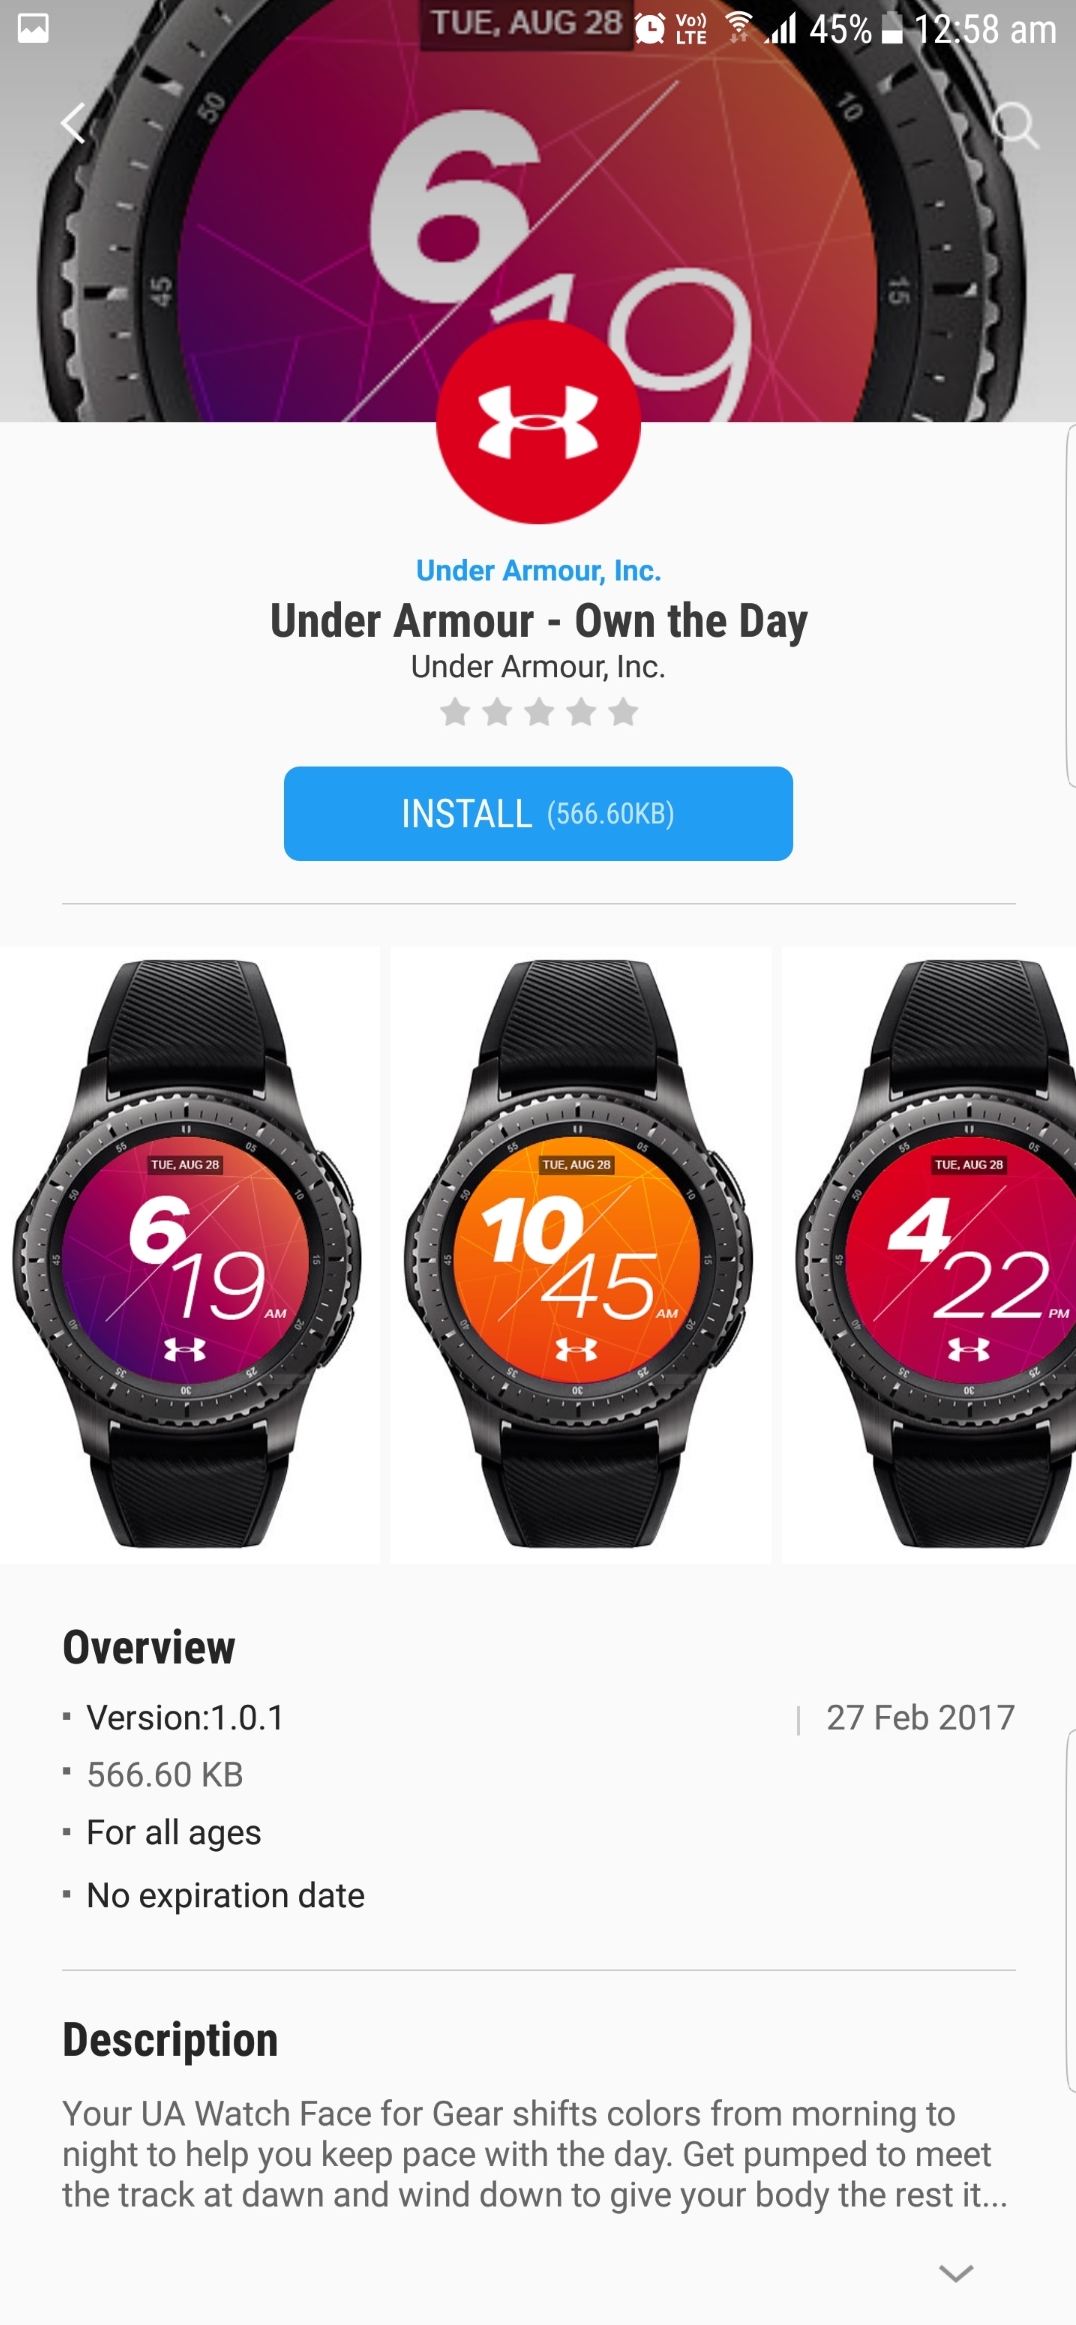 Endomondo, Map Run, and MyFitnessPal apps are now available Gear S2 and S3 SamMobile - SamMobile